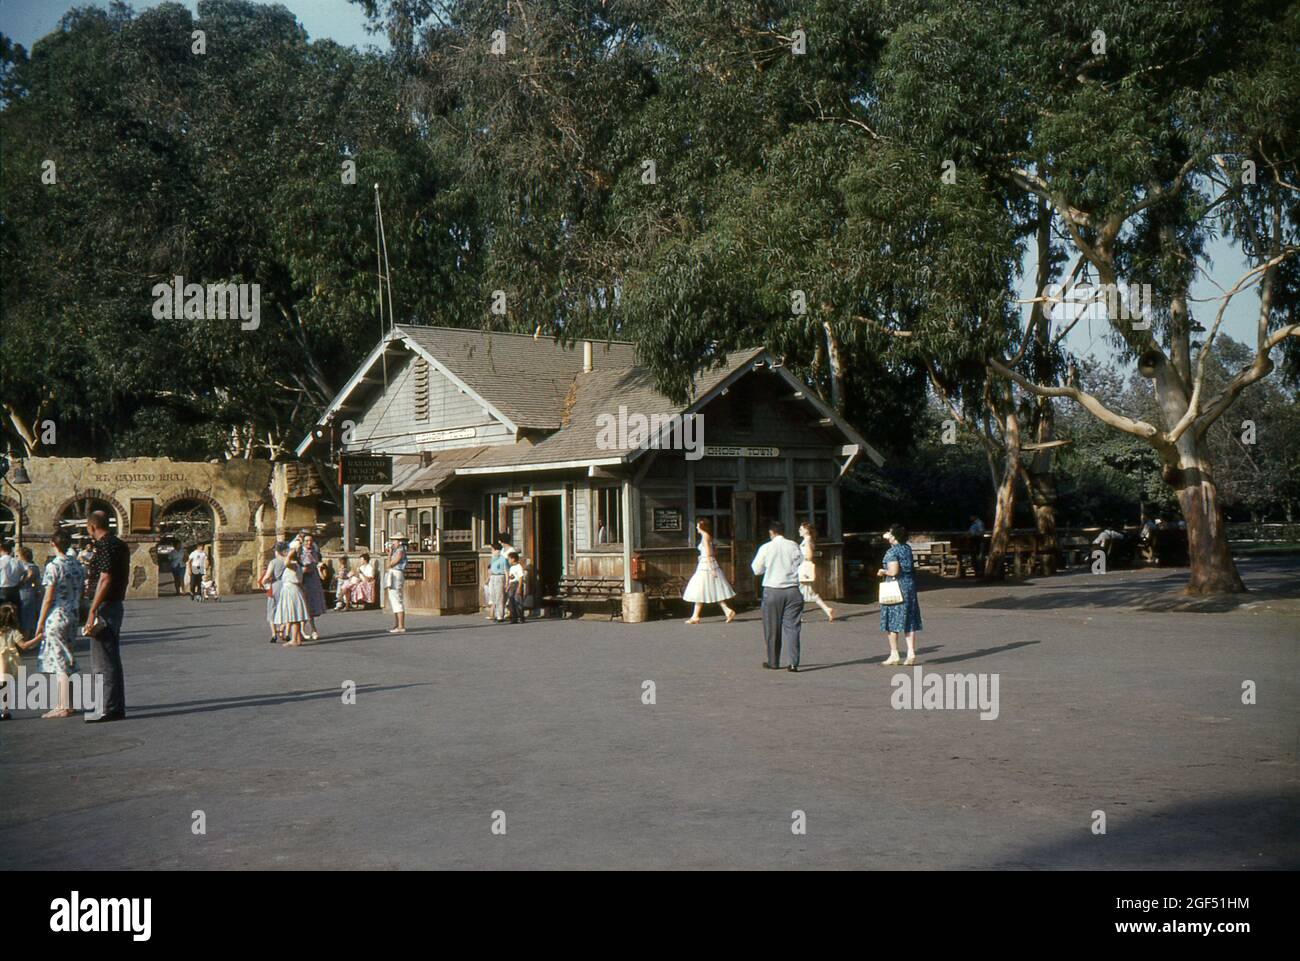 Knott's Berry Farm, Orange County, California. 1959. The Ghost Town & Calico Railroad depot and ticket office. To the left is the adobe archway leading to El Camino Real. Stock Photo